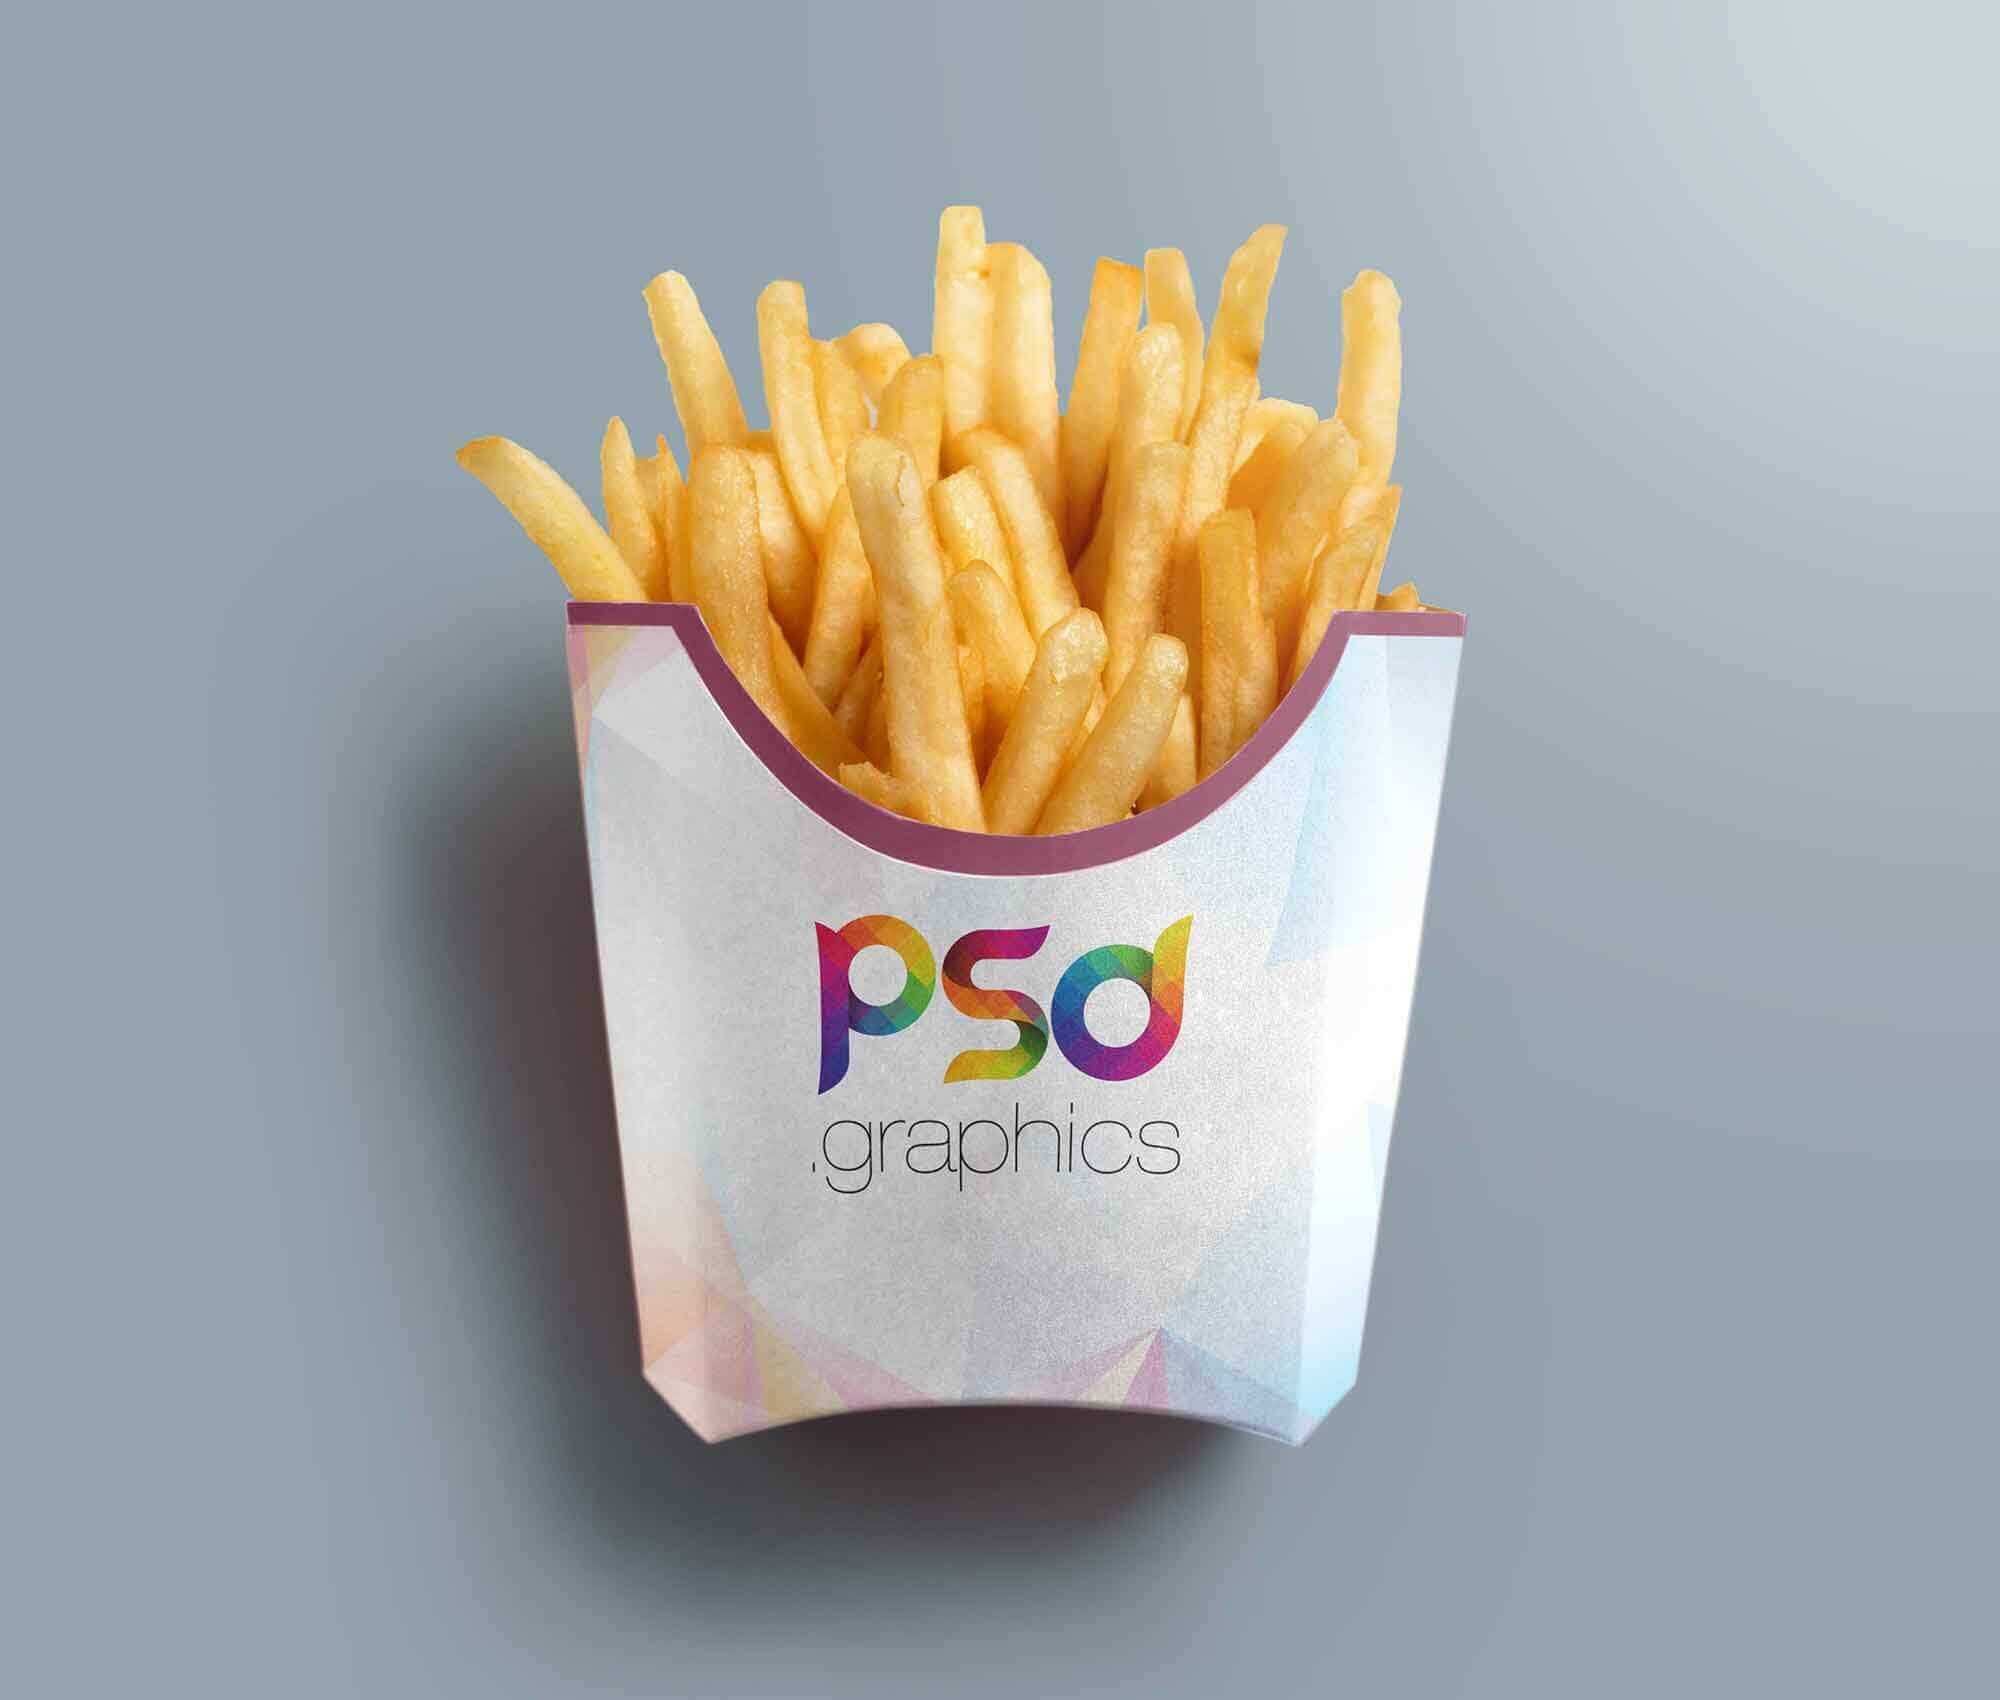 French Fries Box - small